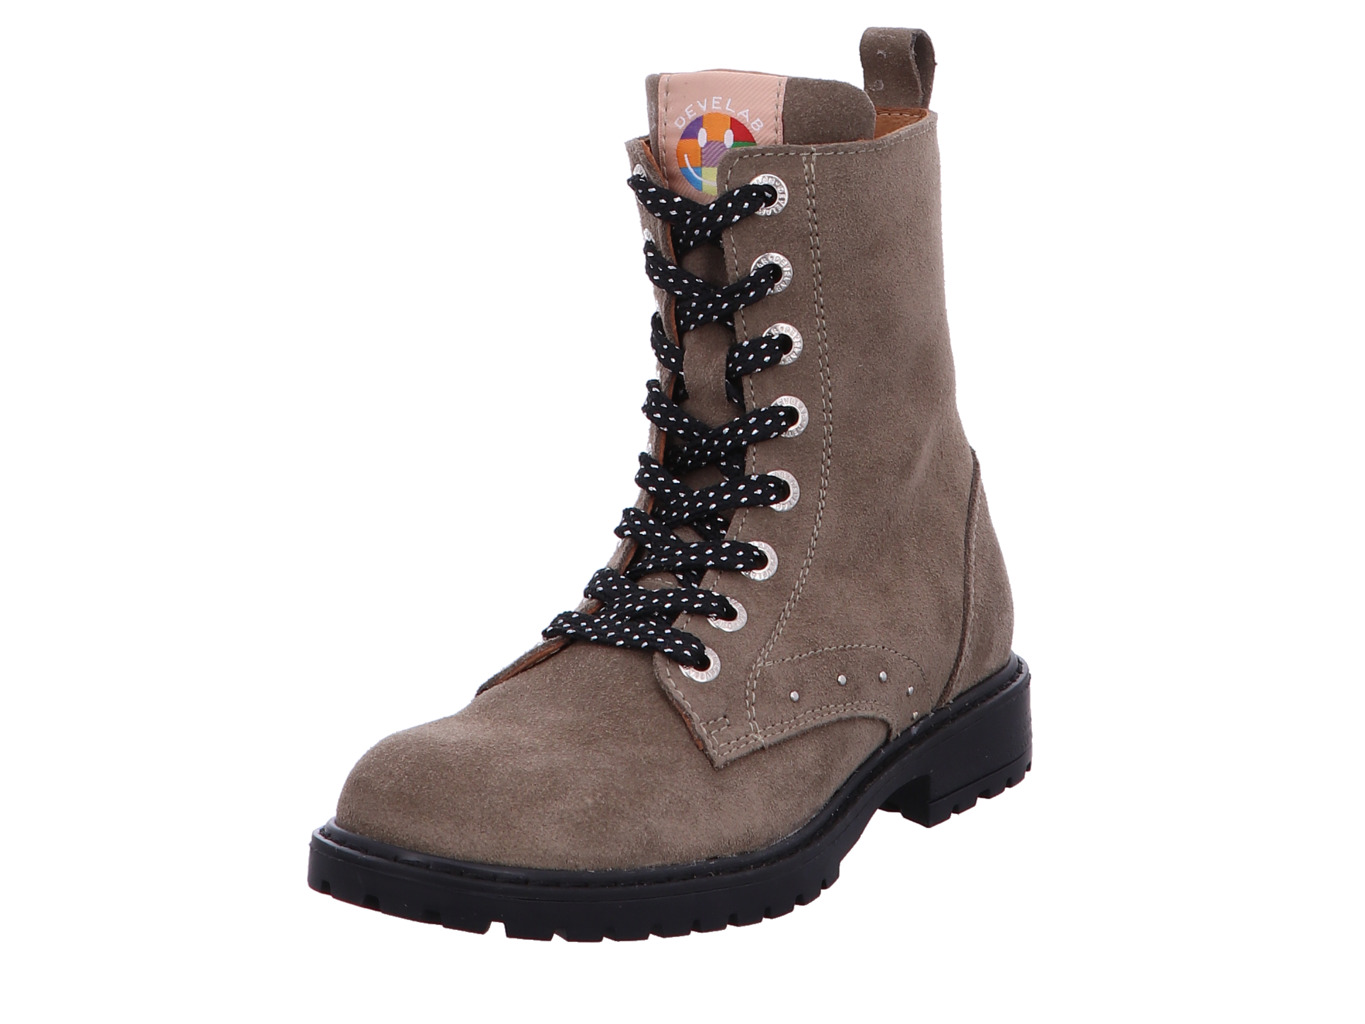 develab_girls_mid_boot_laces_42850_233_1173